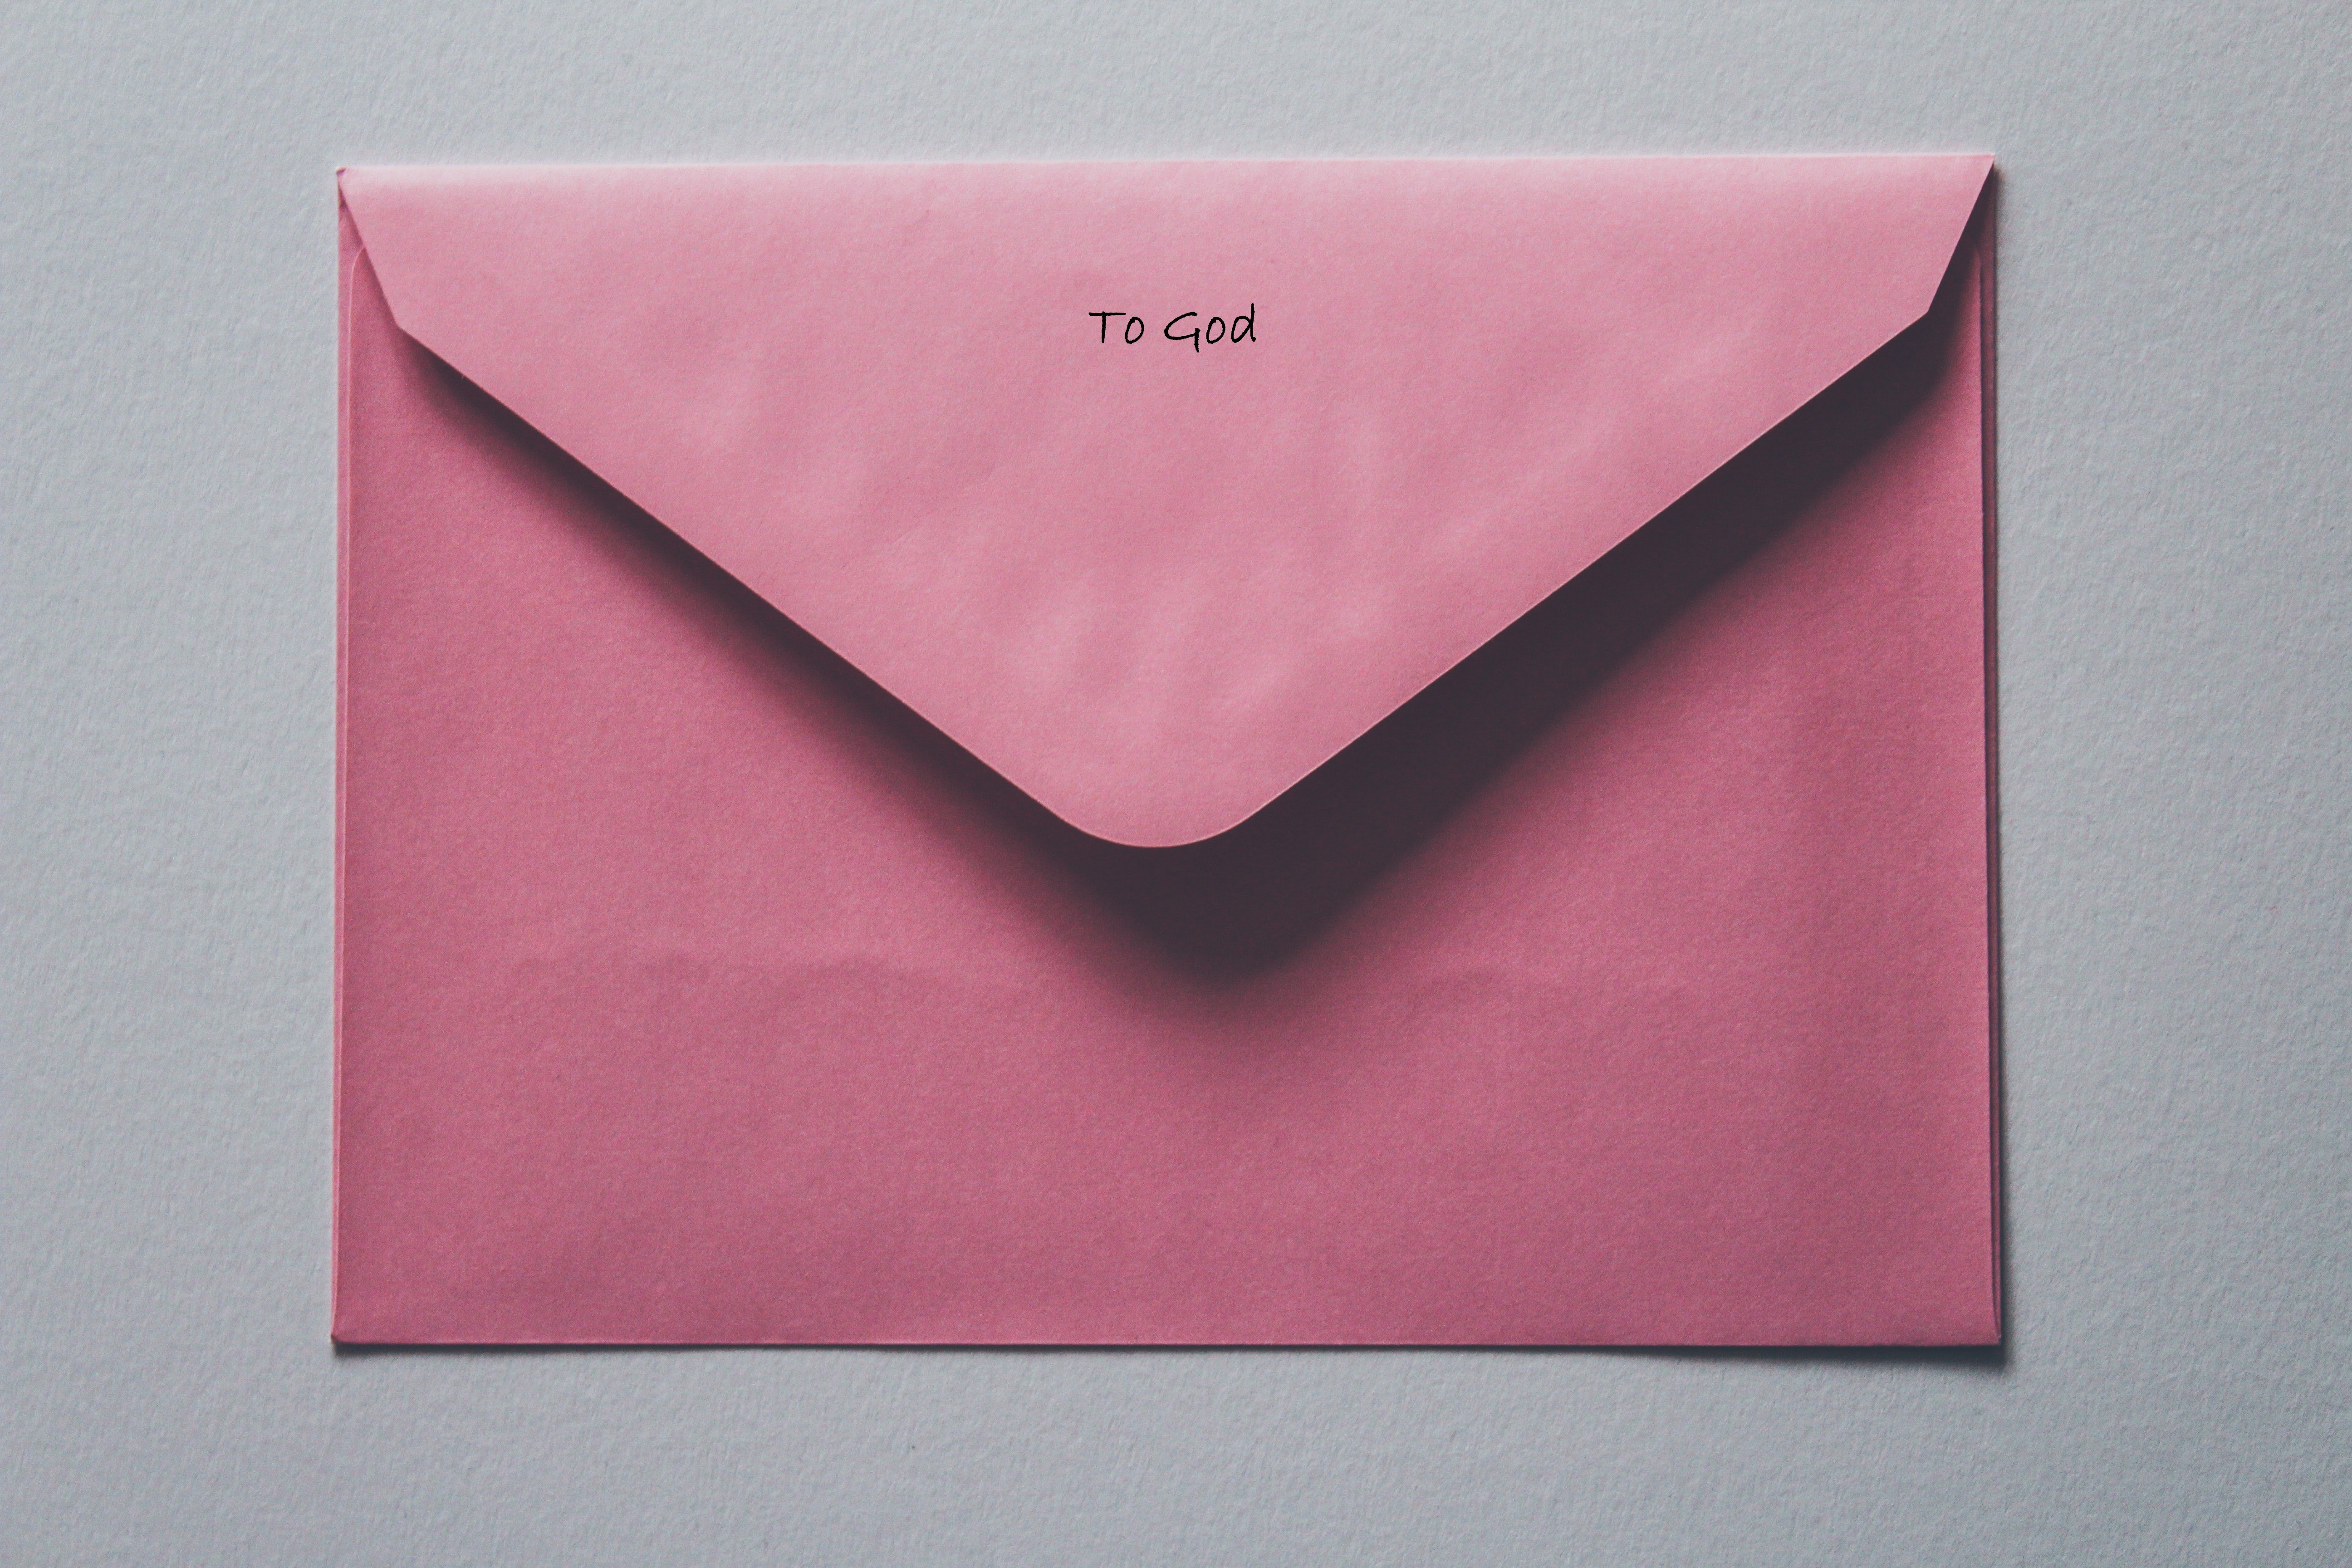 Mailman Cobbs took the letter from the boy & became teary-eyed after reading it. | Source: Unsplash